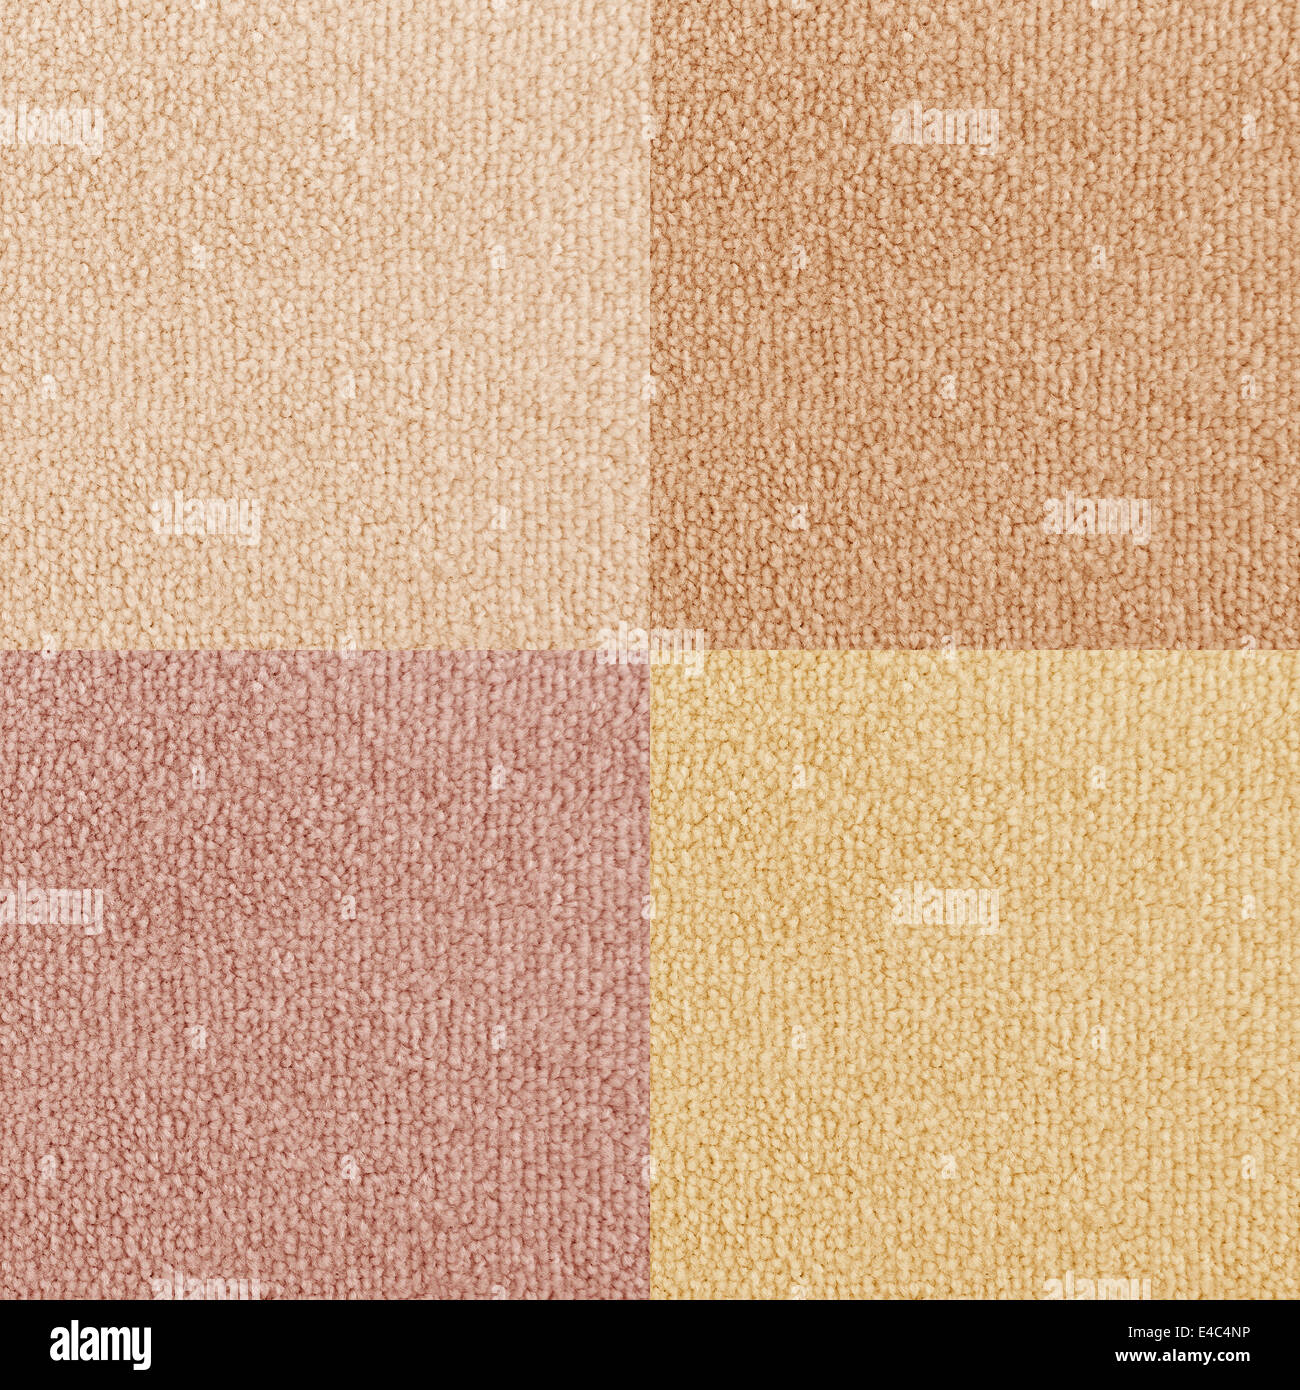 New carpet texture samples. Bright color carpet flooring as seamless background. Stock Photo